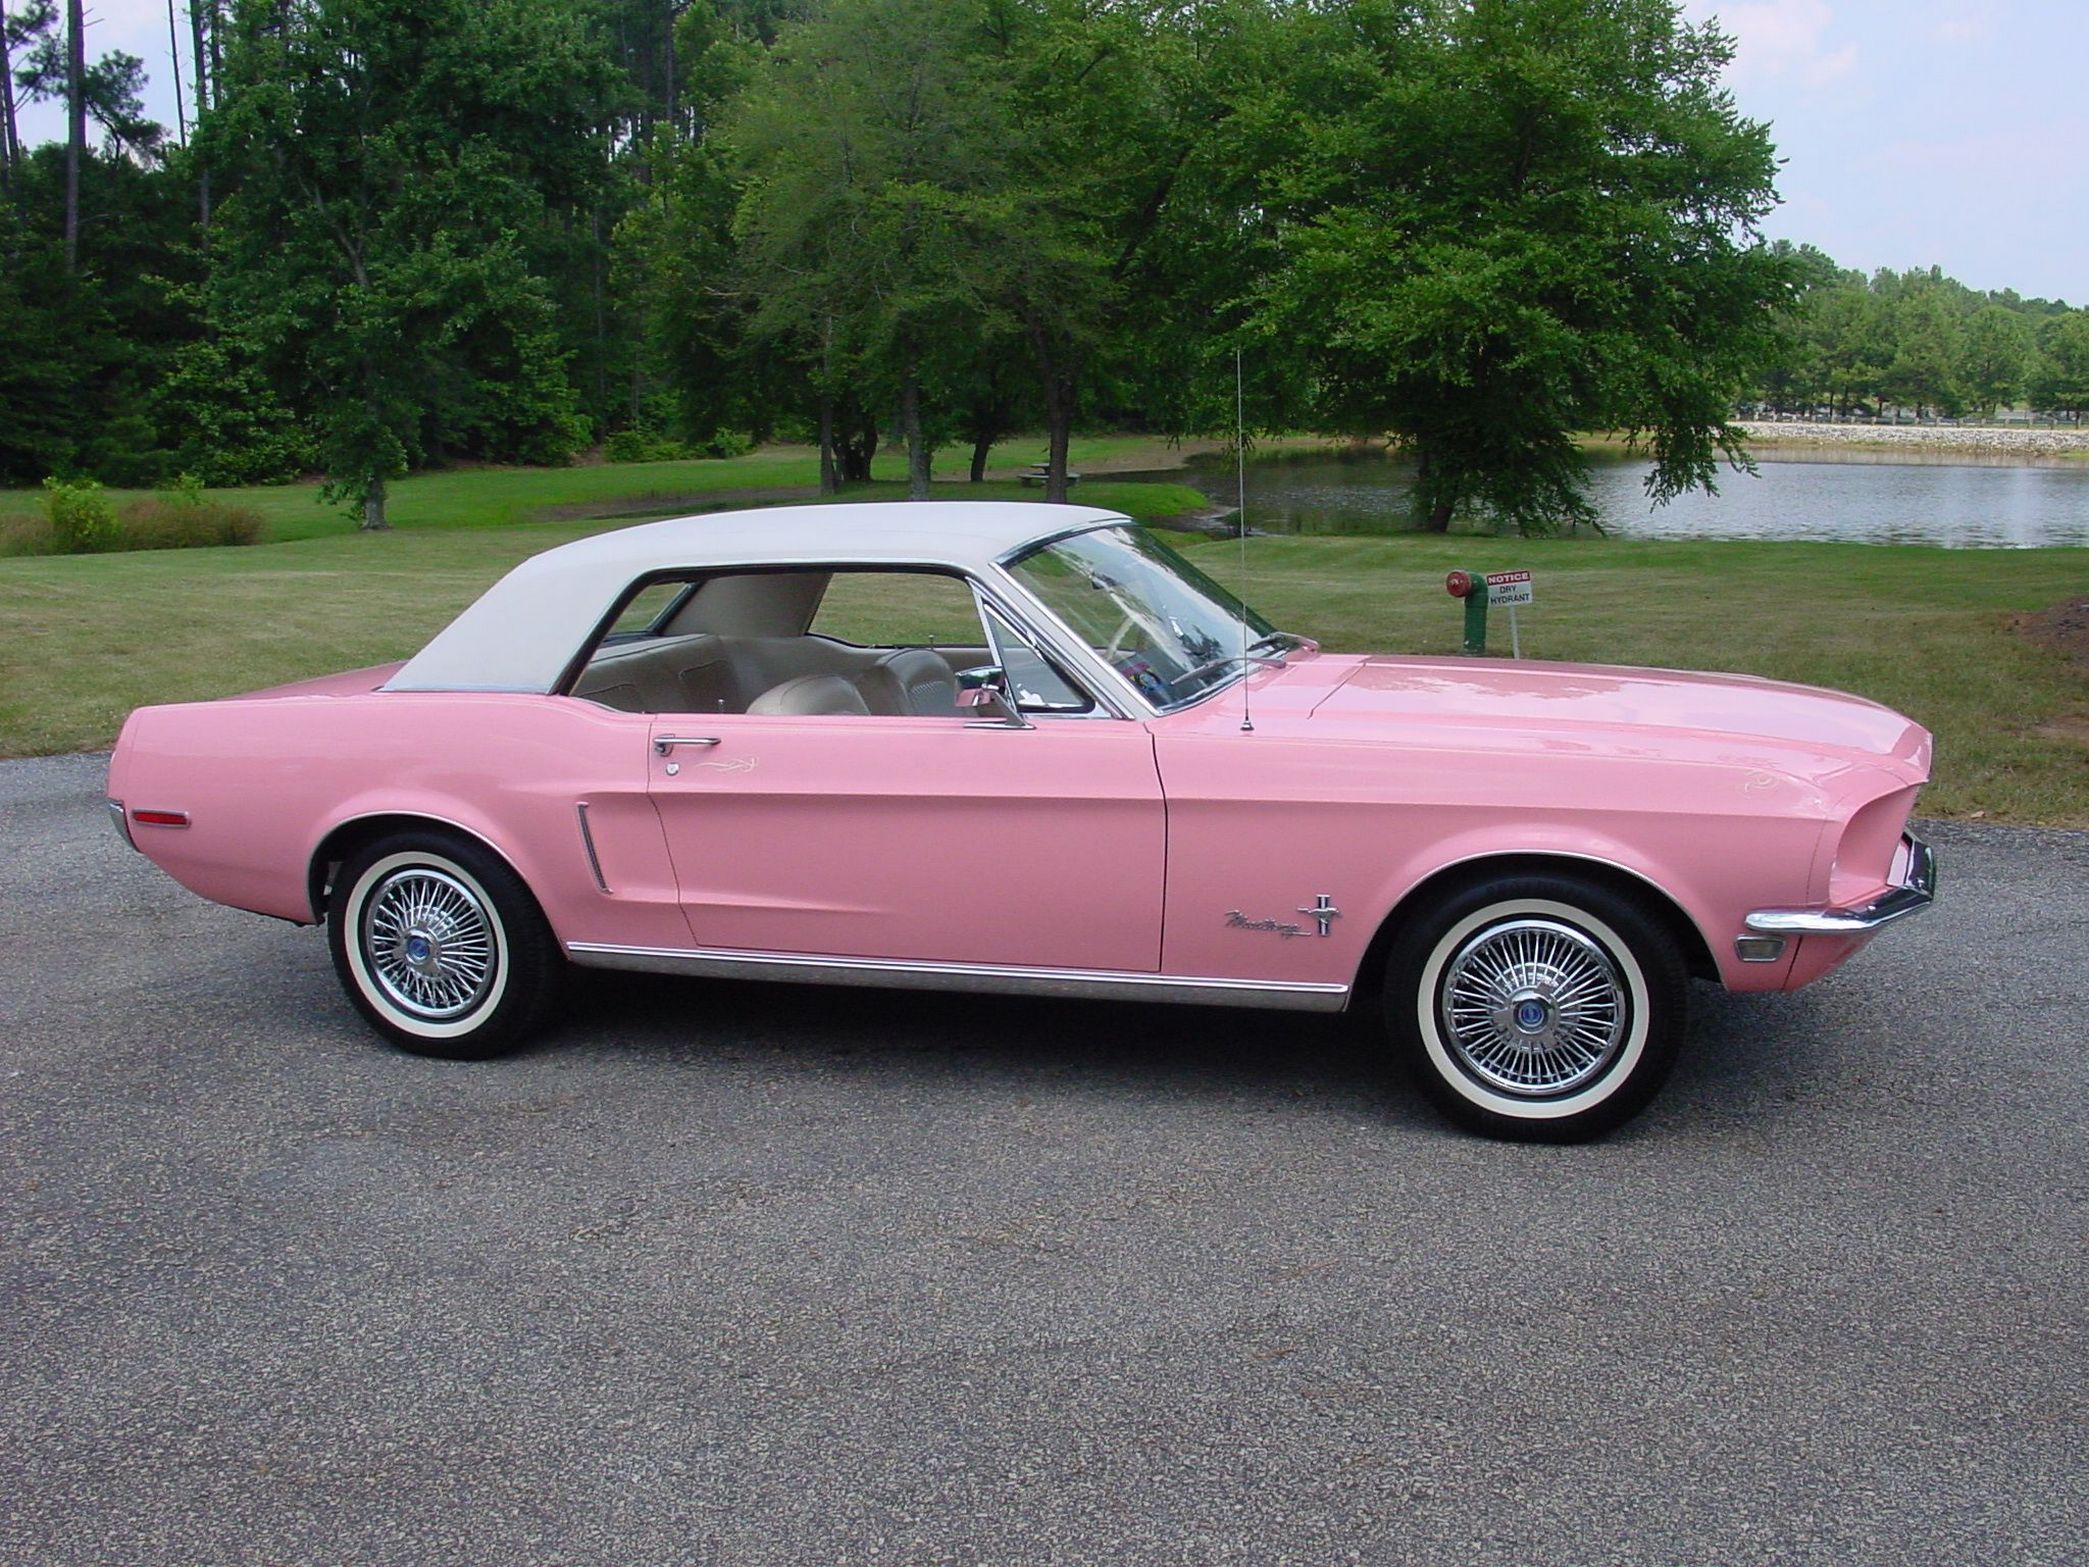 Pictures of 1965 Mustangs in Playboy Pink color scheme. 